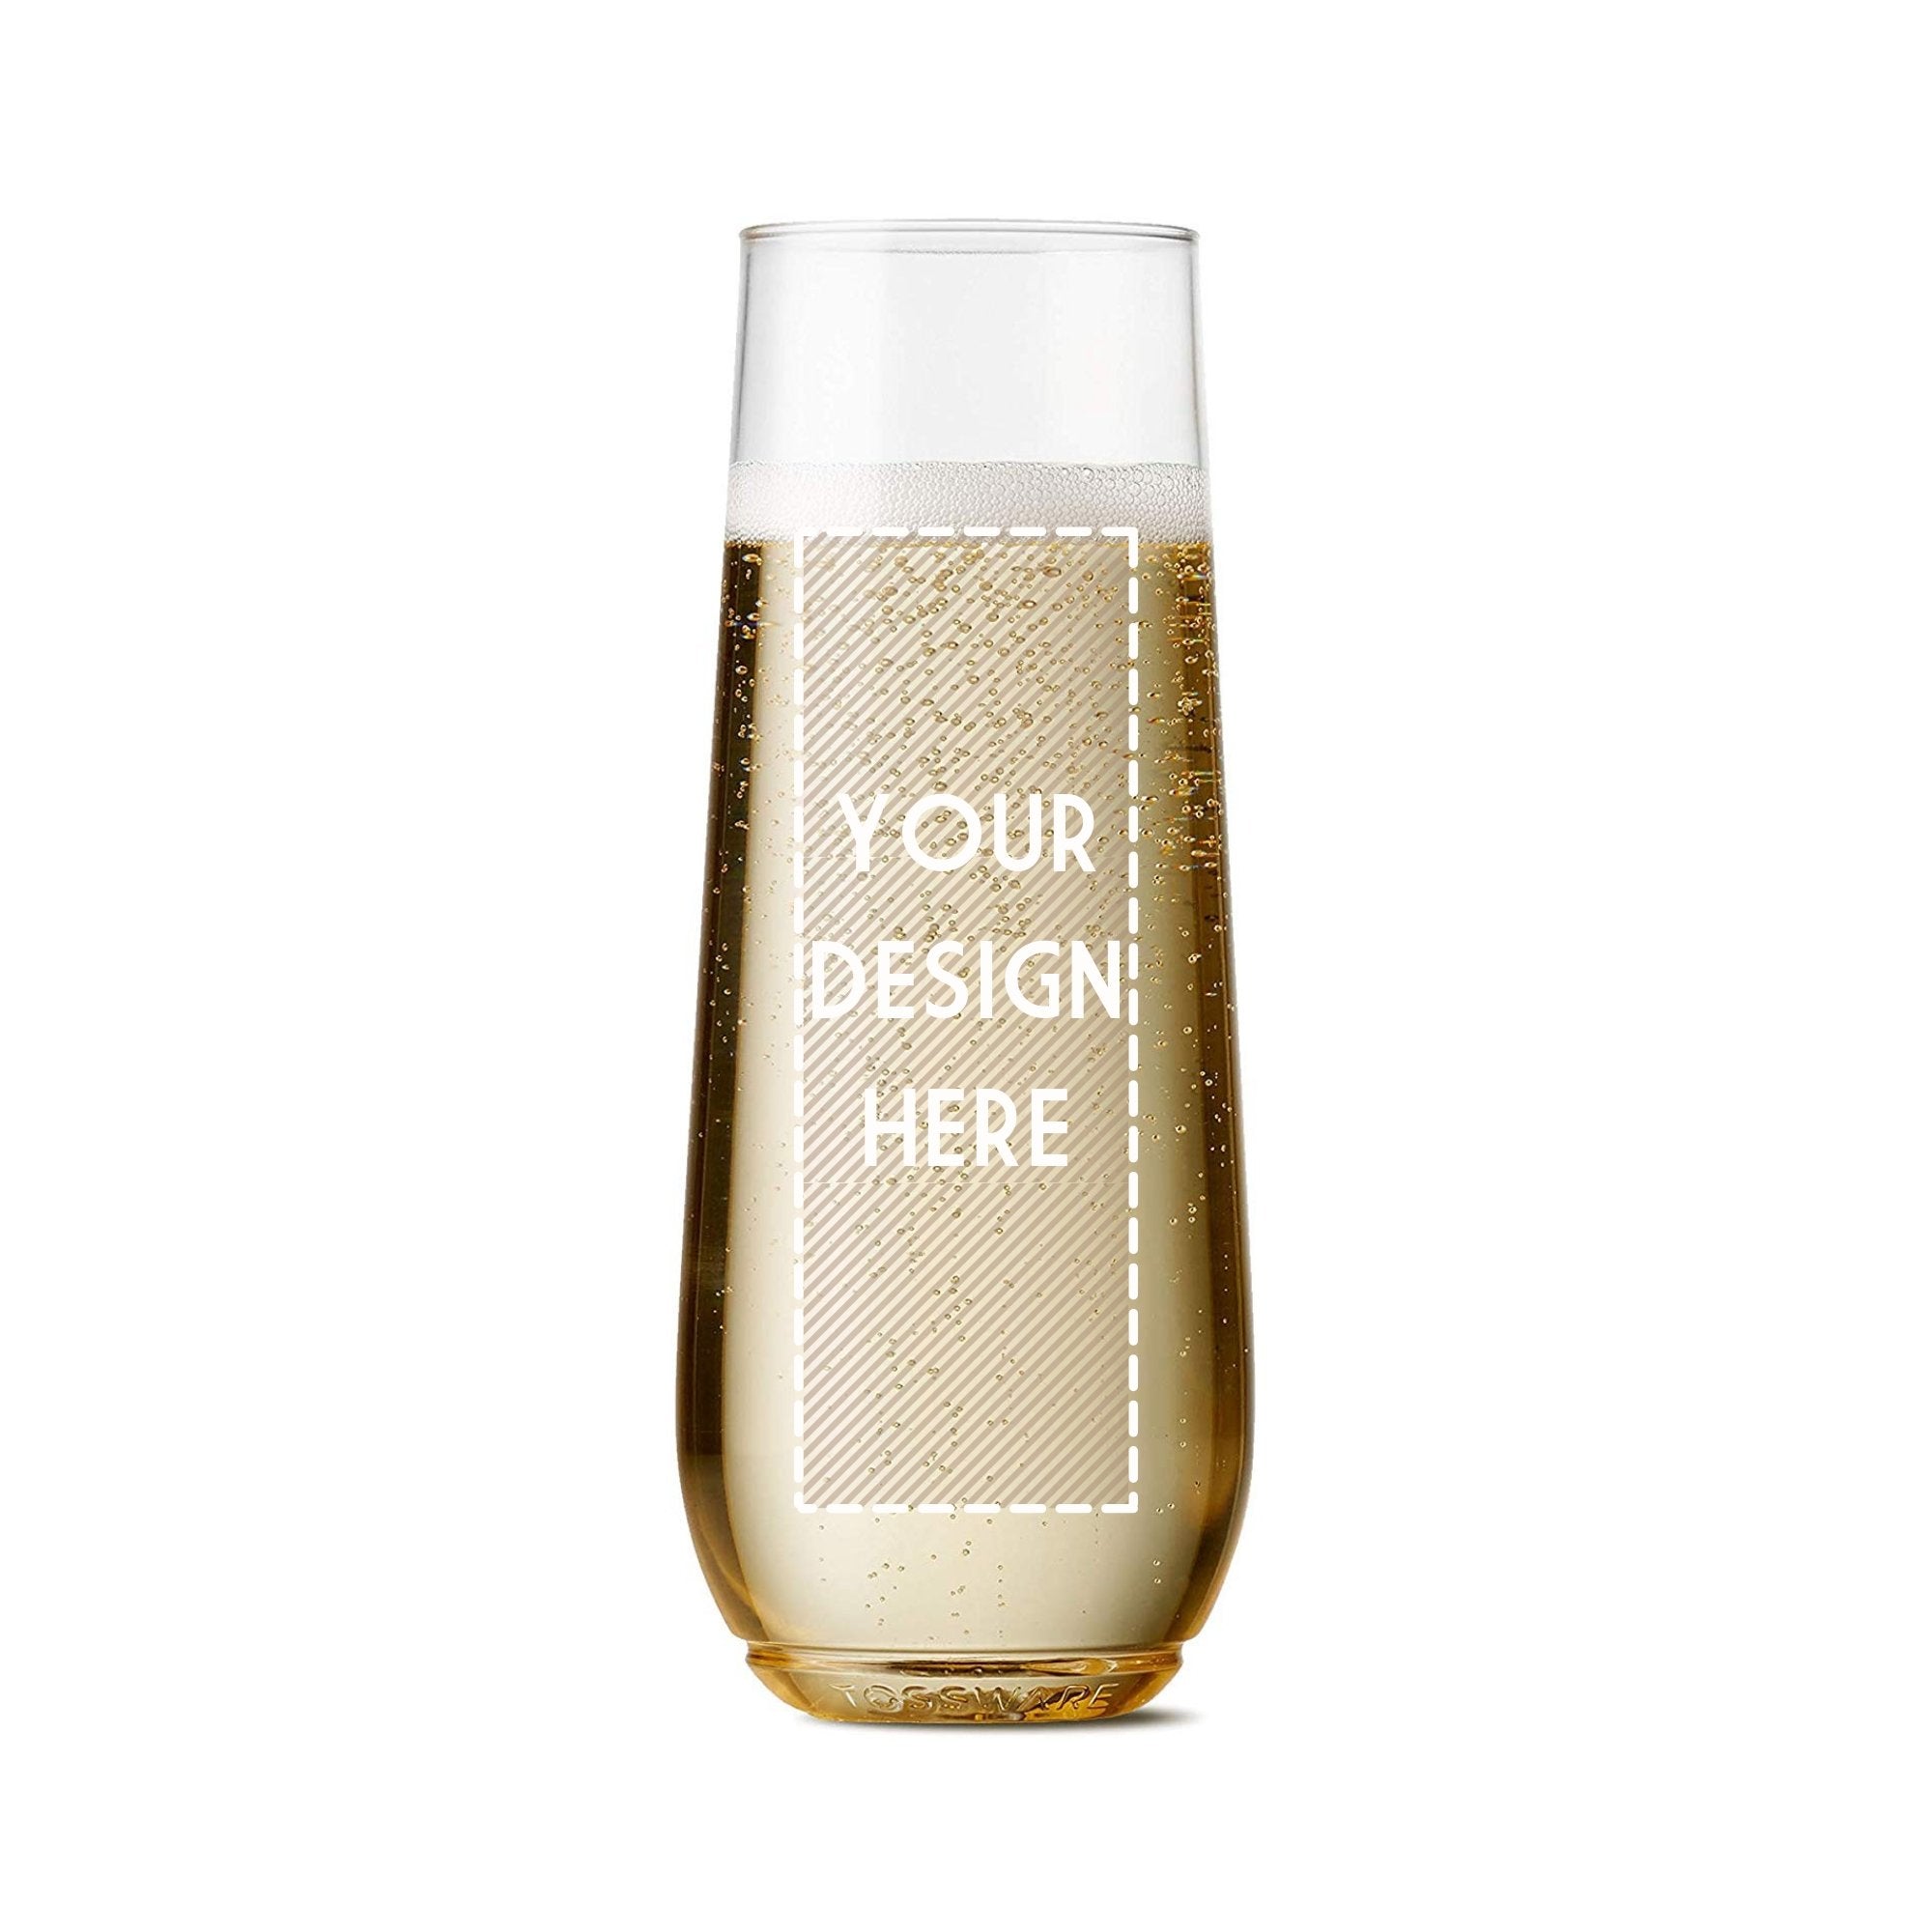 An acrylic champagne flute with a customizable area on the front